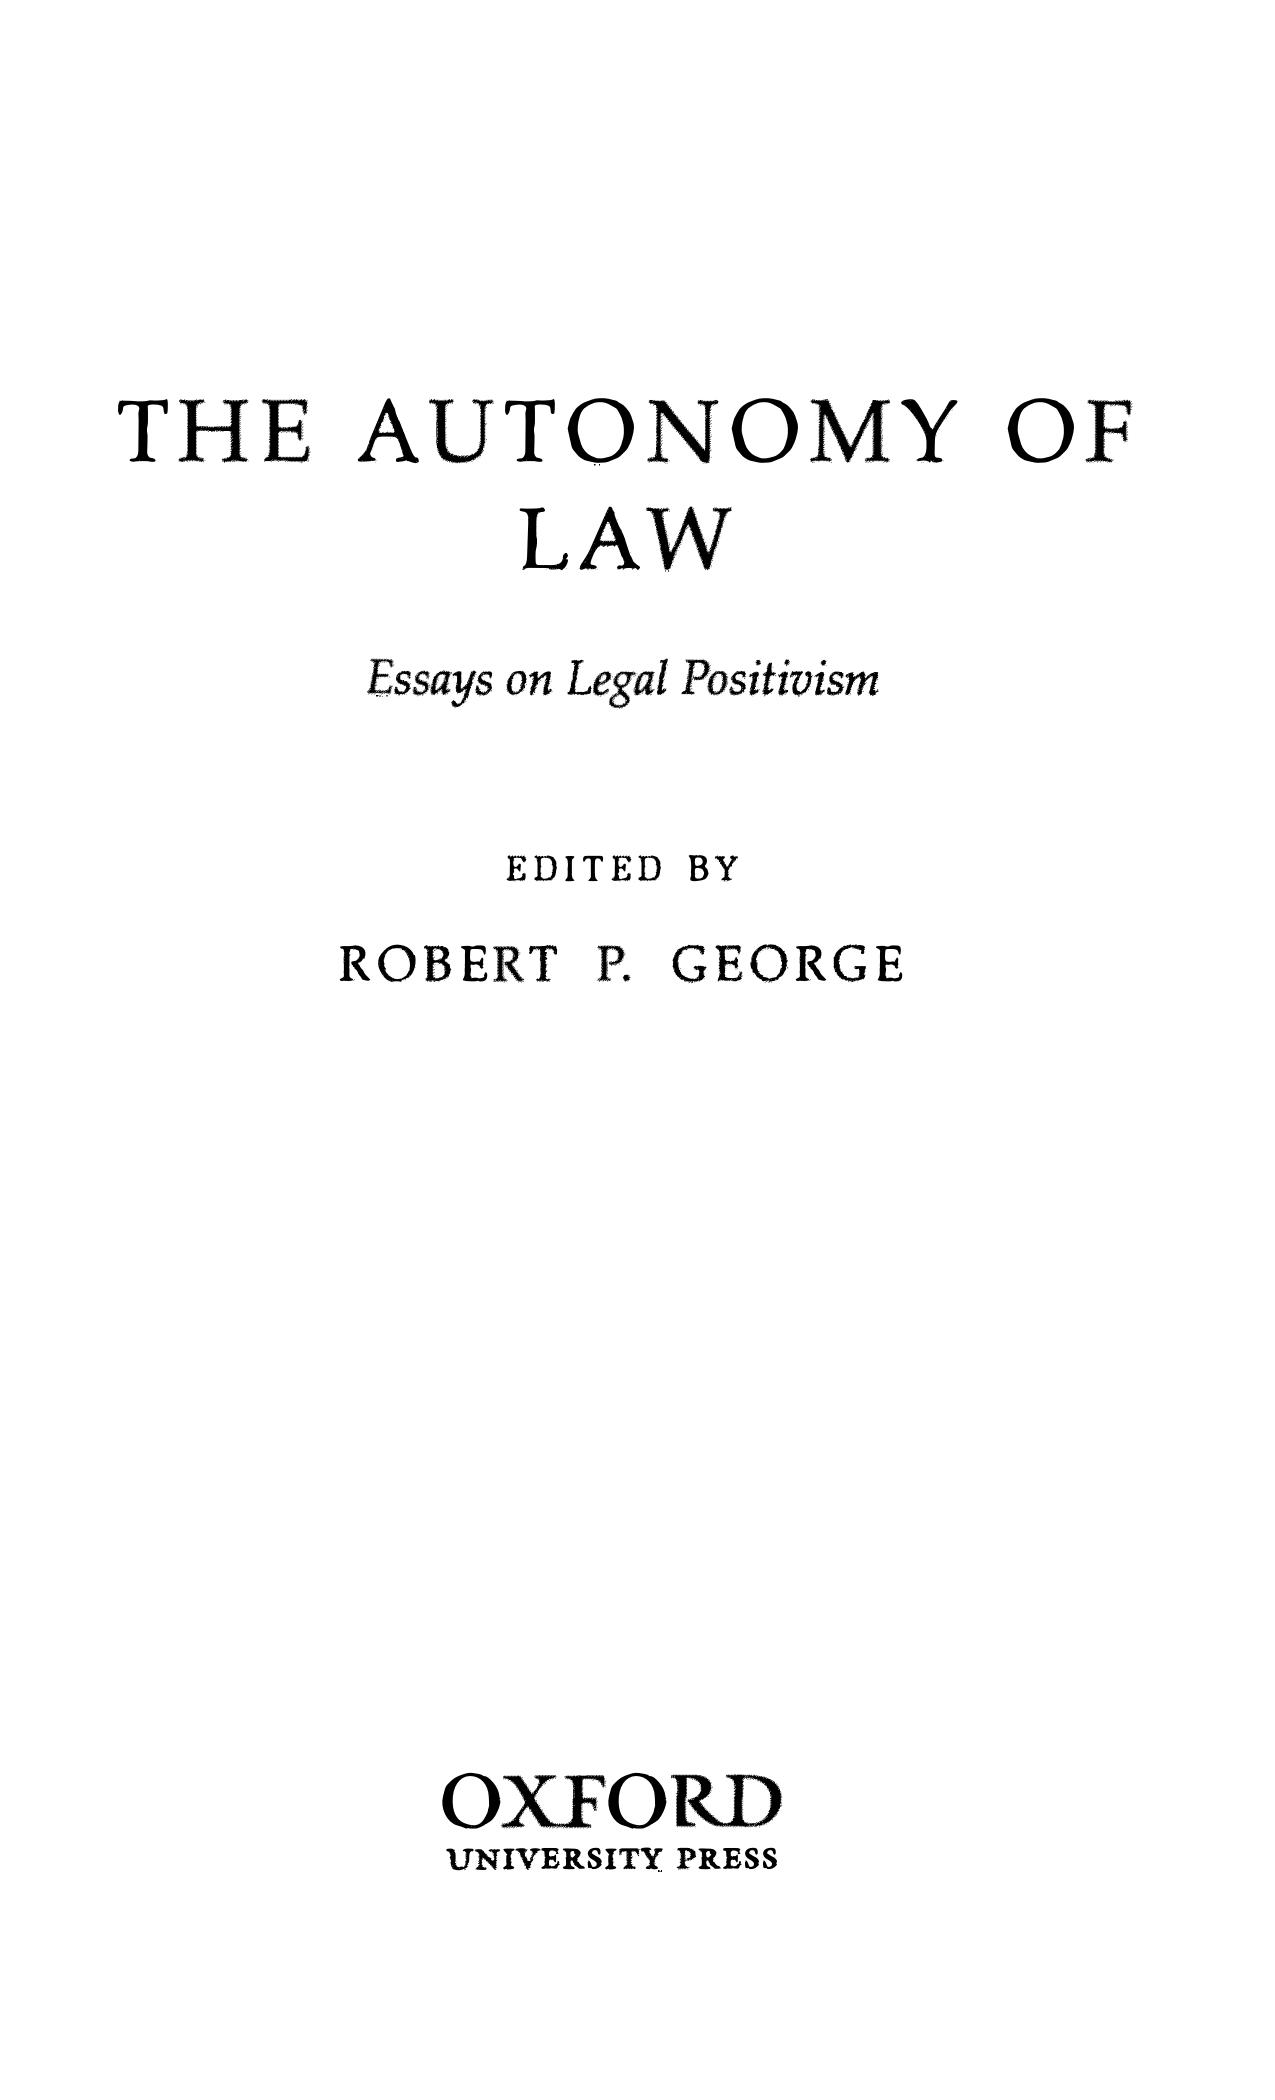 Autonomy of Law - Essays on Legal Positivism by Robert P. George